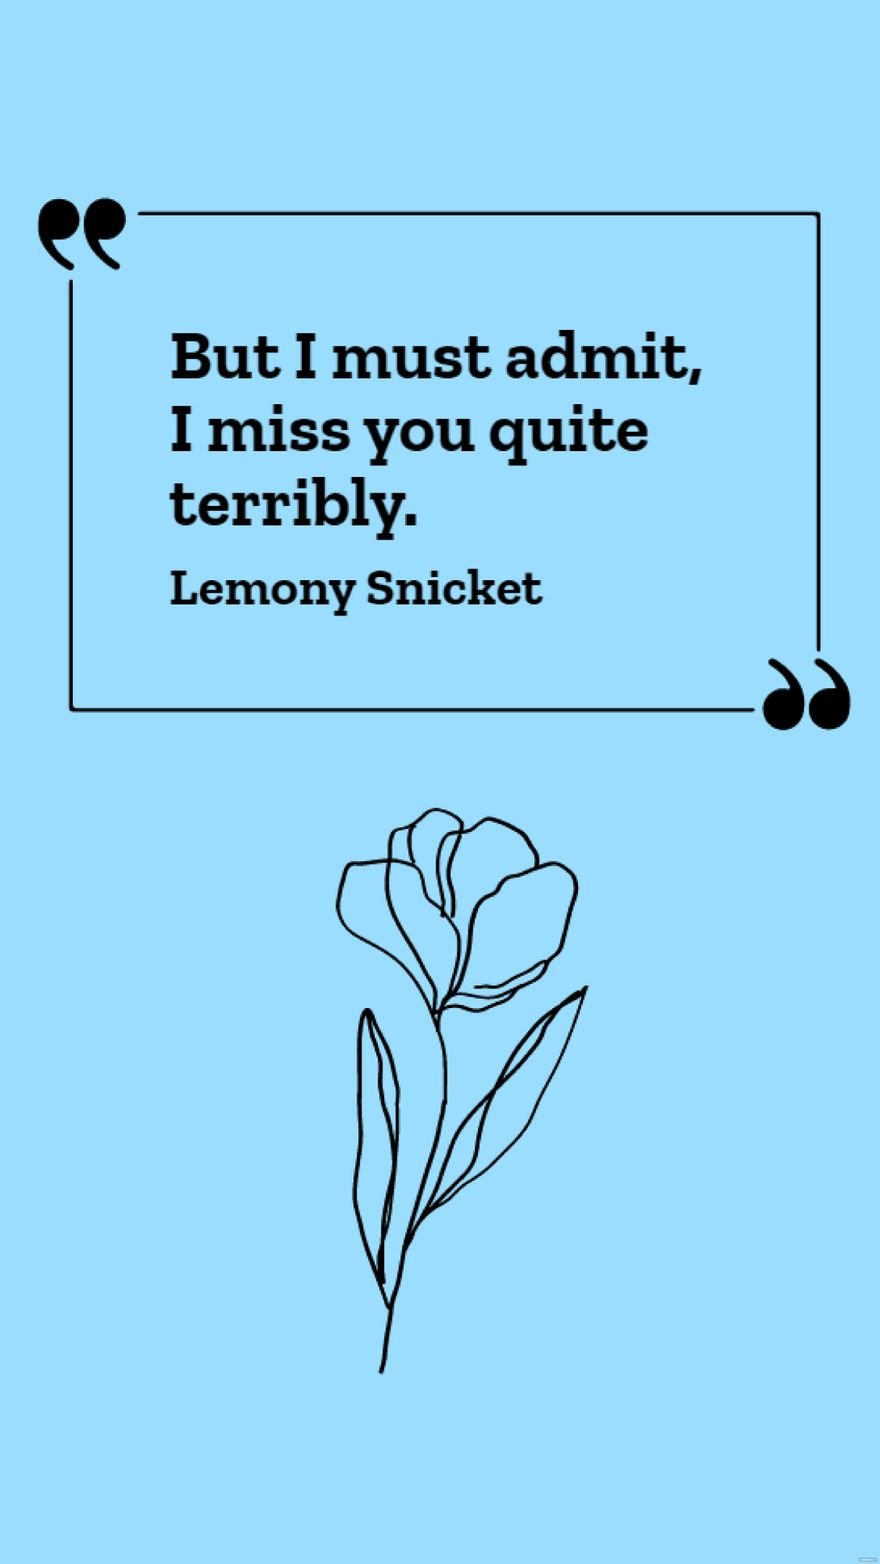 Lemony Snicket, The Beatrice Letters - But I must admit, I miss you quite terribly. in JPG